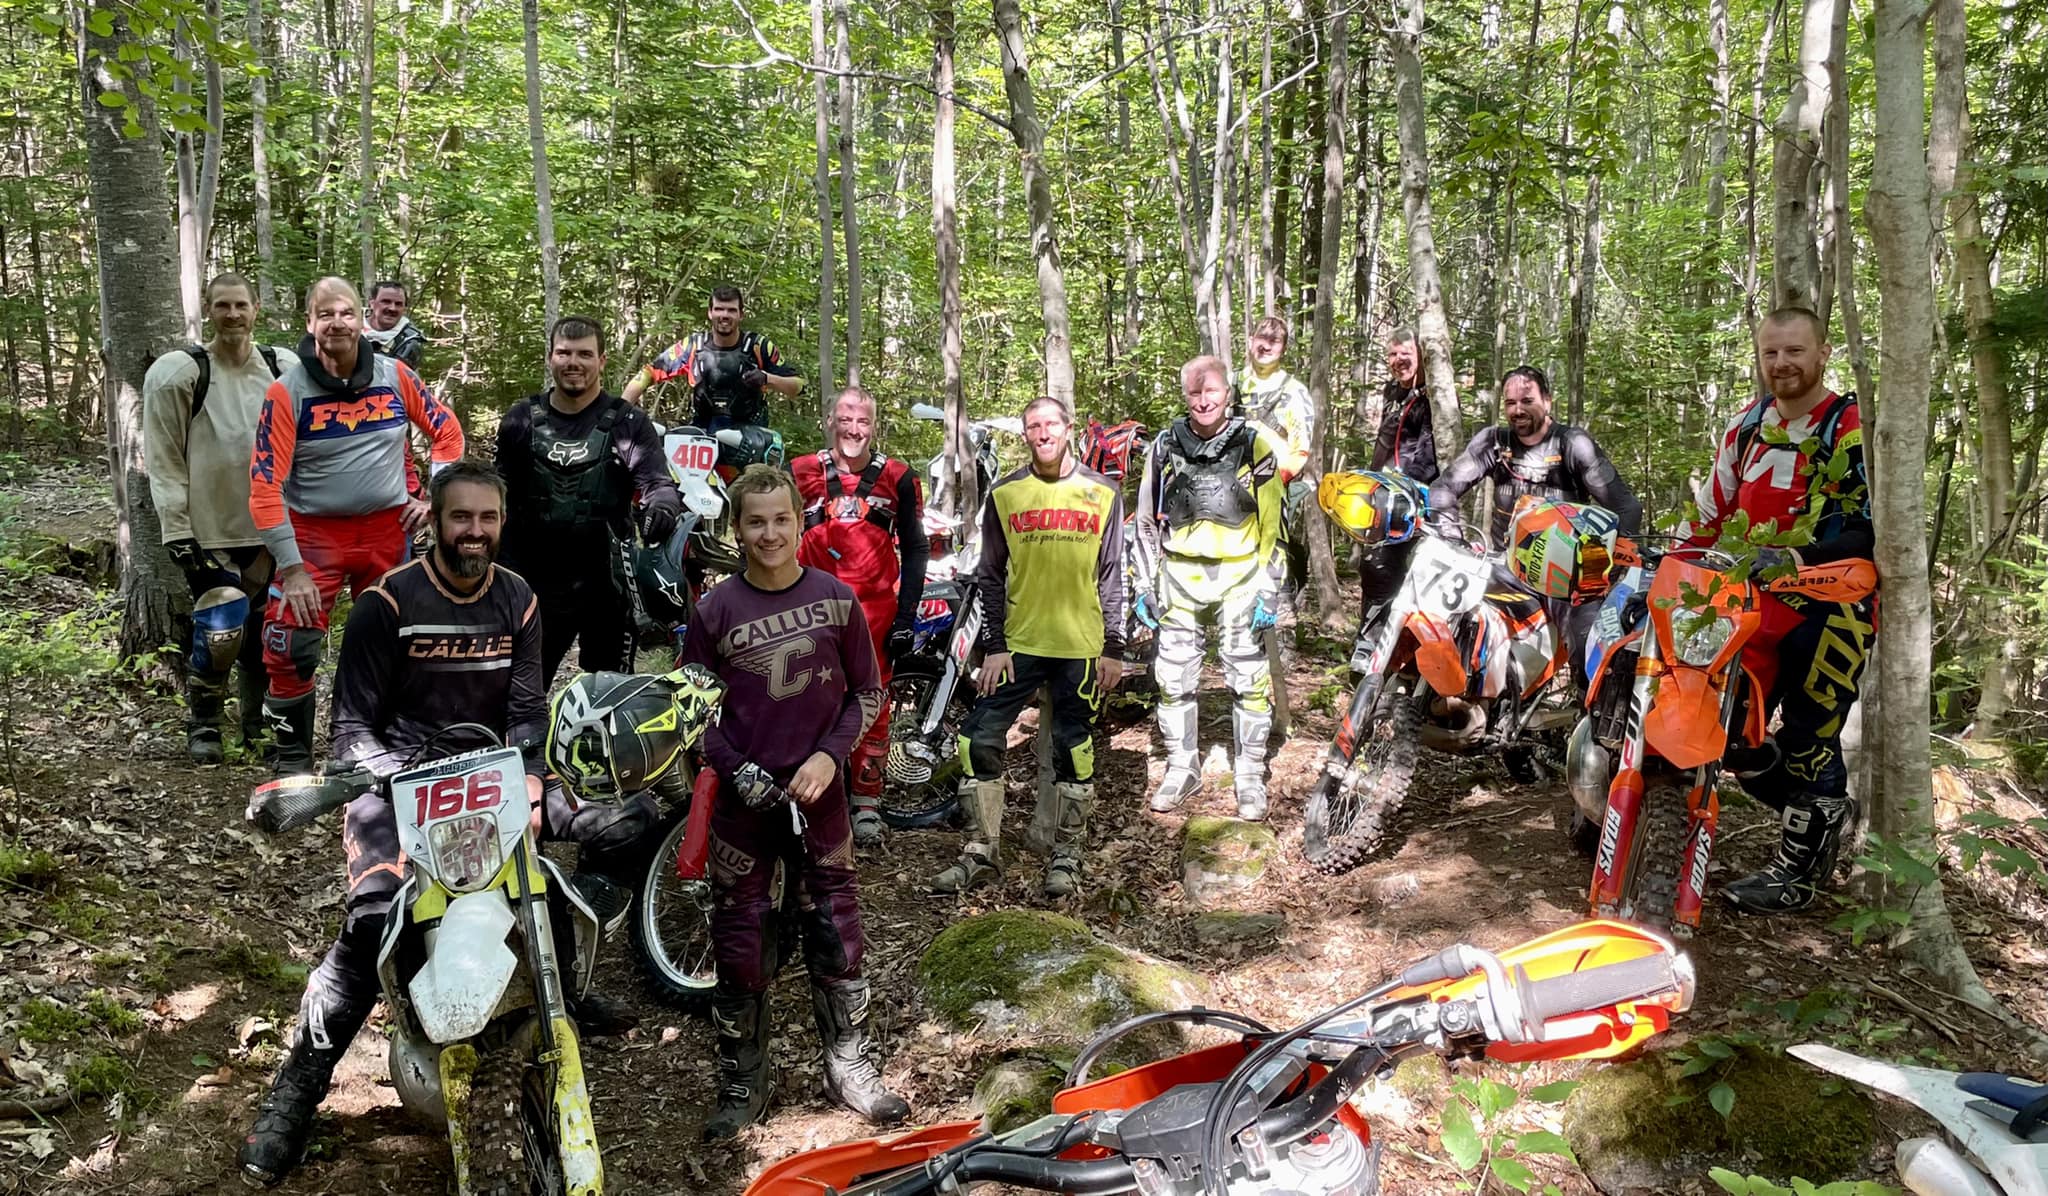 Group of offroad riders in the woods